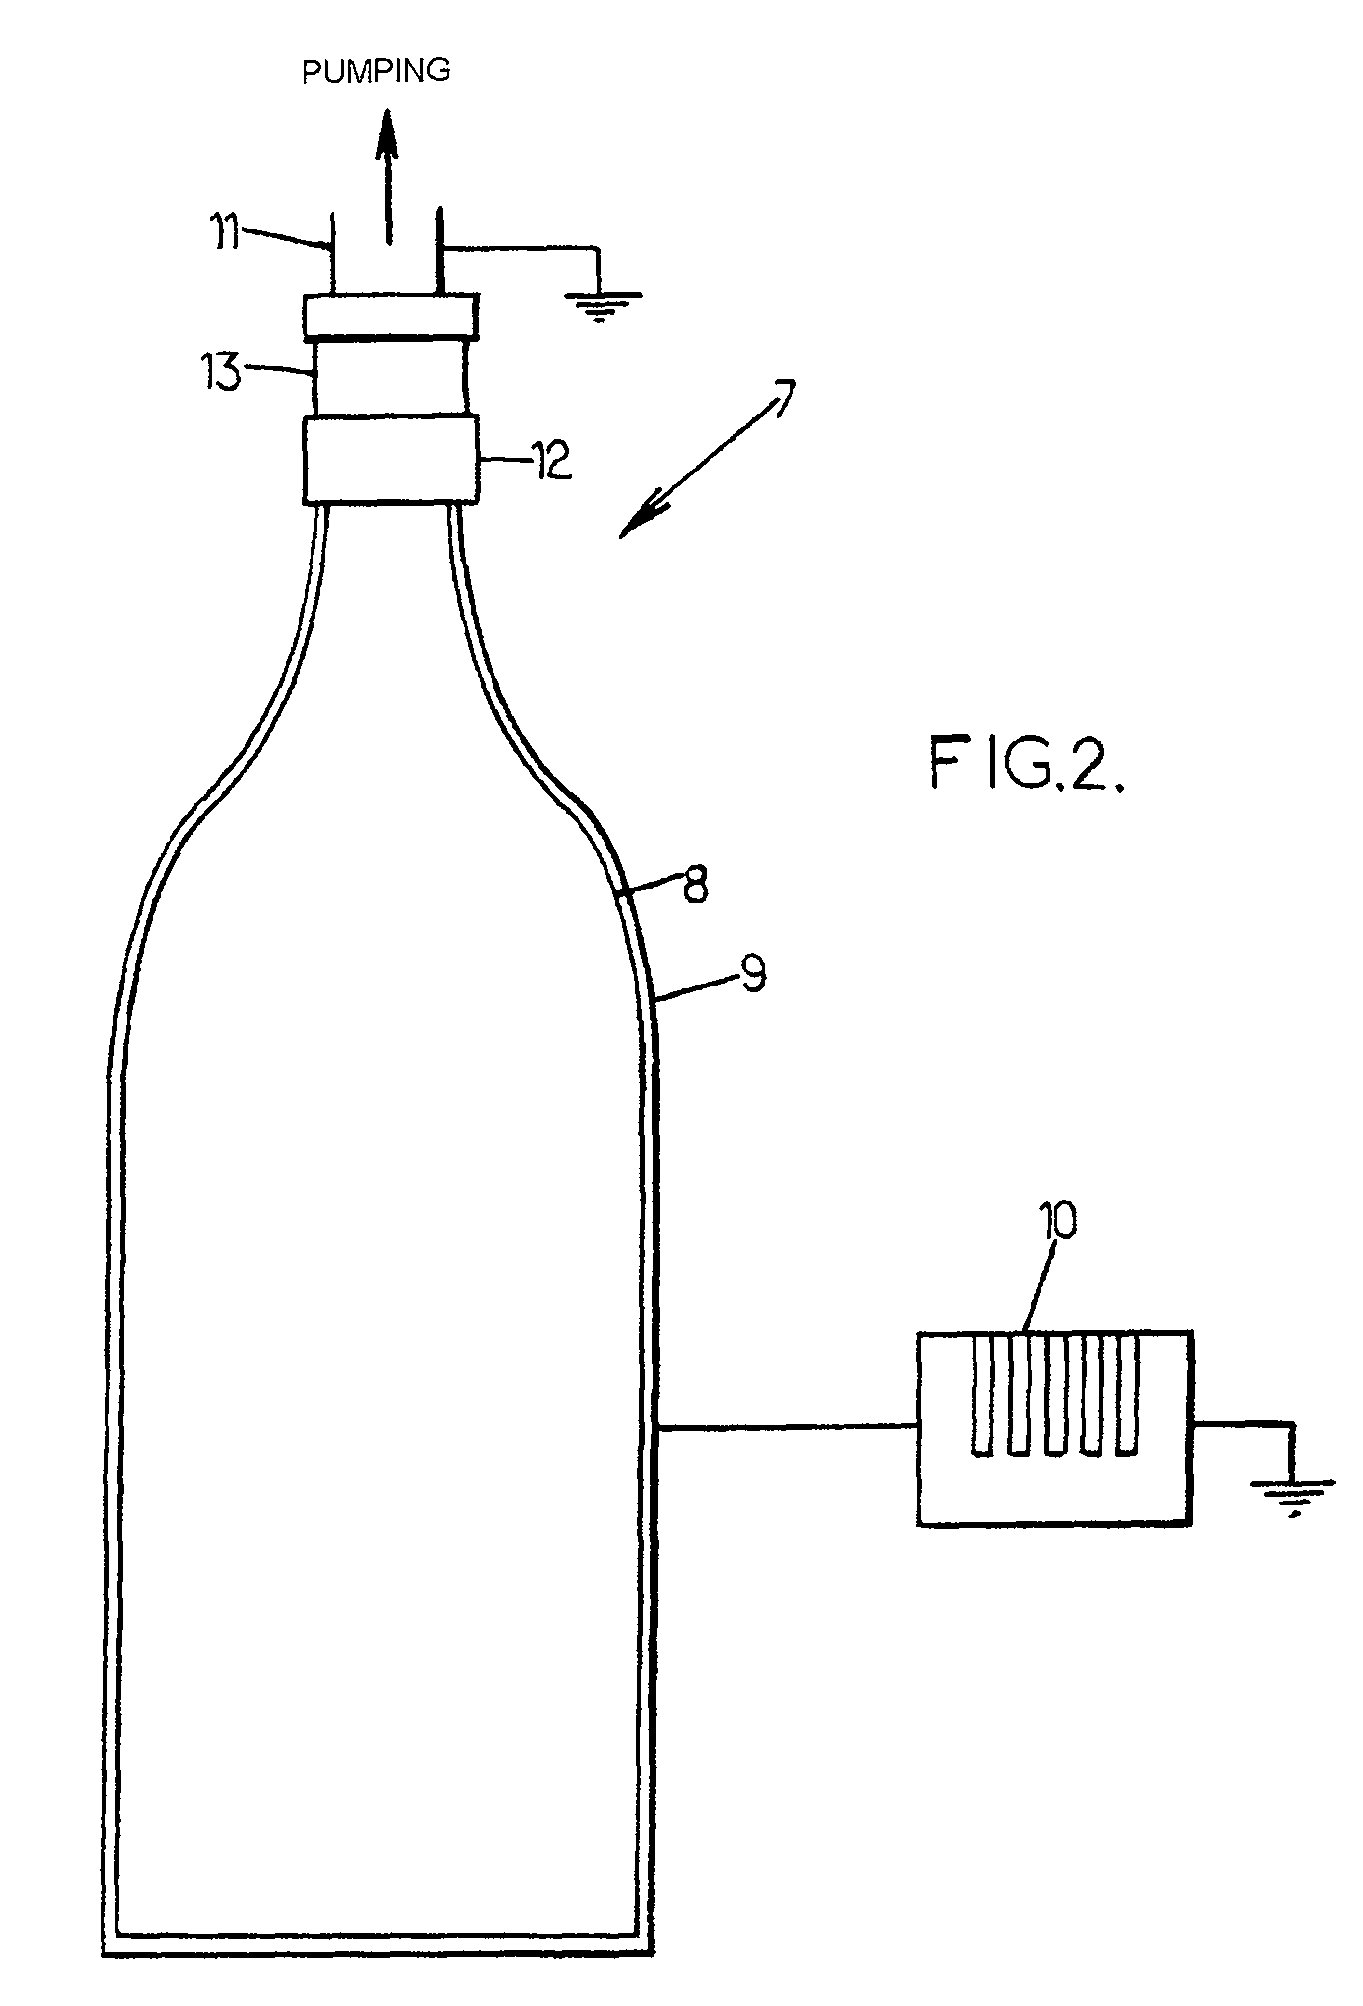 Method for cold plasma treatment of plastic bottles and device for Implementing Same